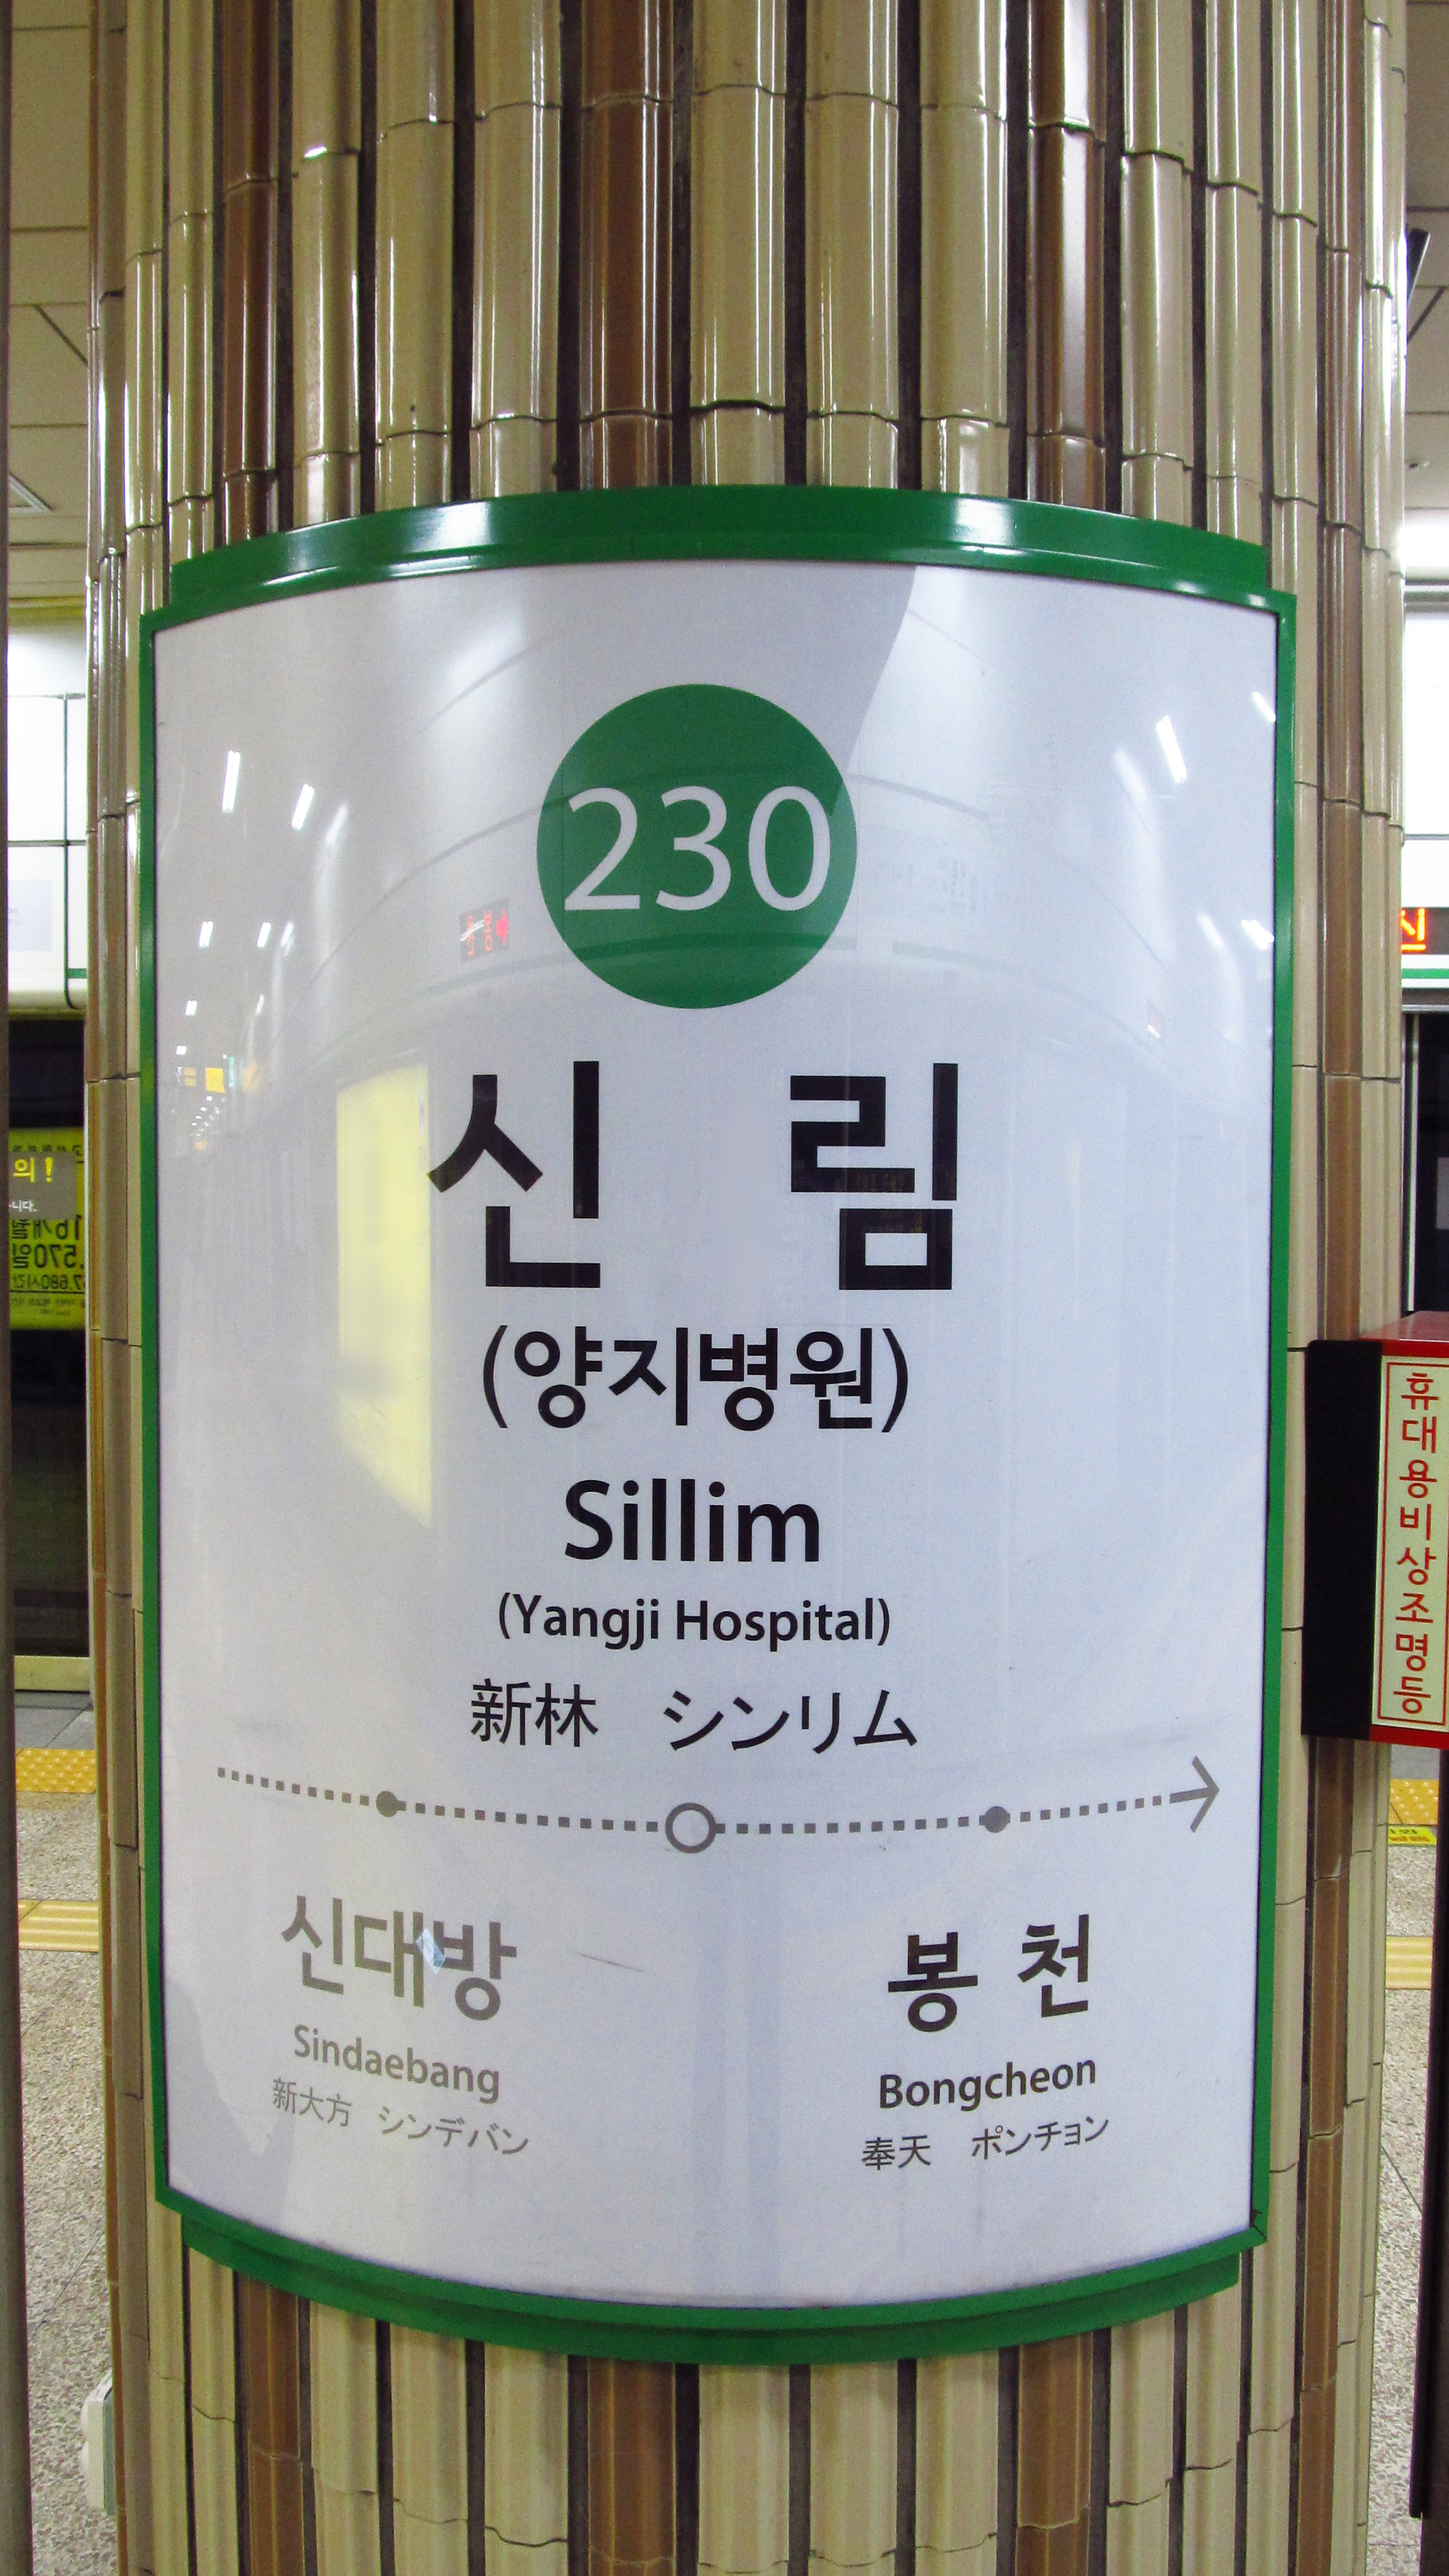 Espere Espectacular Tratamiento Preferencial File:Seoul-metro-230-Sillim-station-sign-20181121-122304.jpg - Wikimedia  Commons